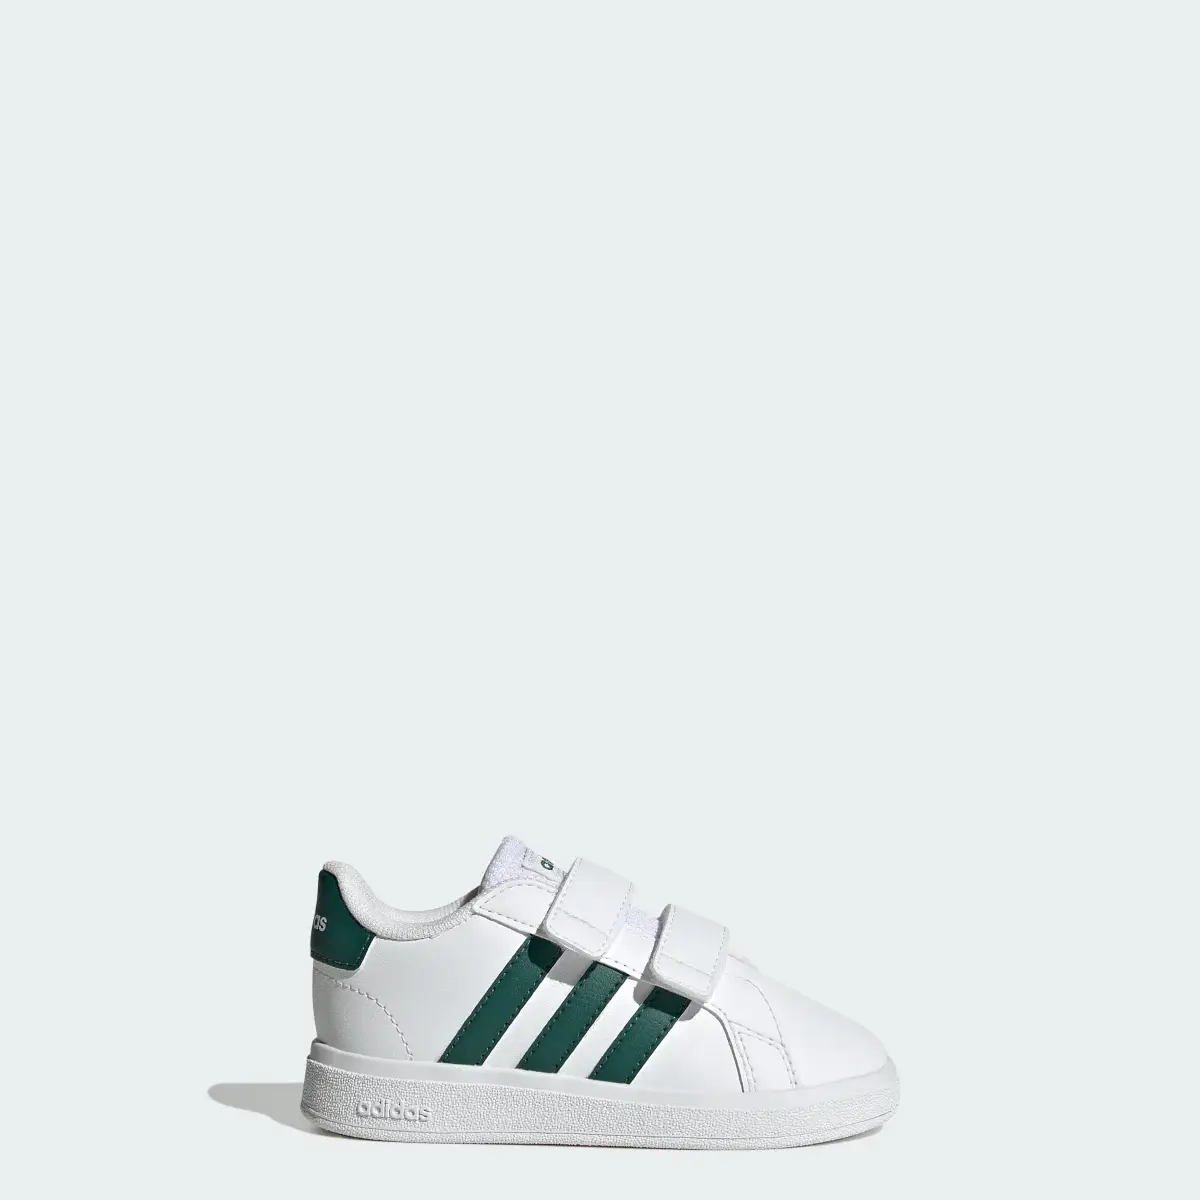 Adidas Grand Court Lifestyle Hook and Loop Schuh. 1